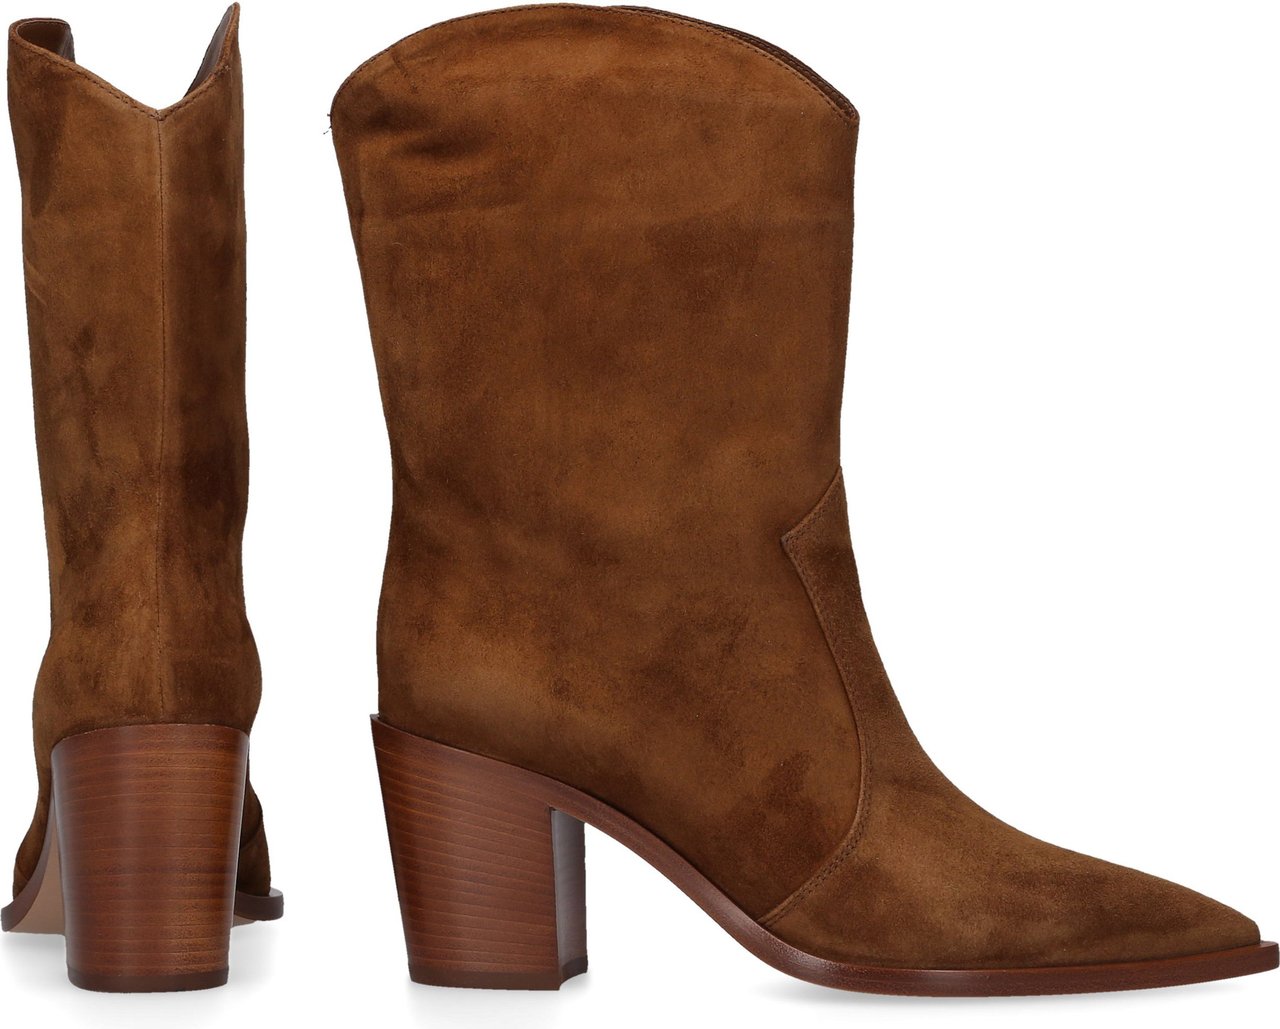 Gianvito Rossi Ankle Boots Denver Suede Texaner Bruin